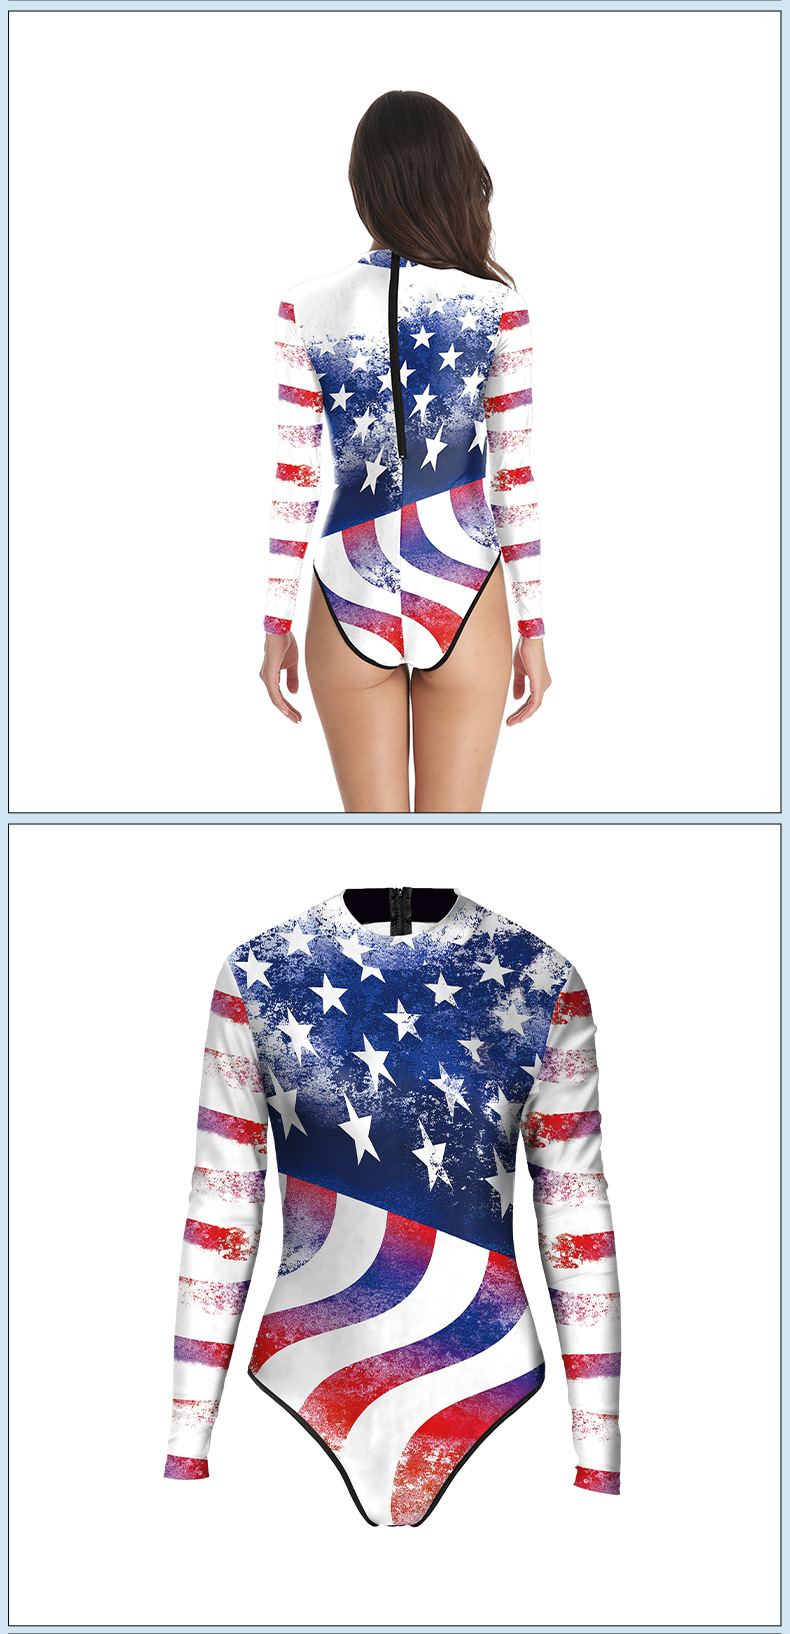 Independence Day USA FLAG 3D print one pieces beach wear female - model show